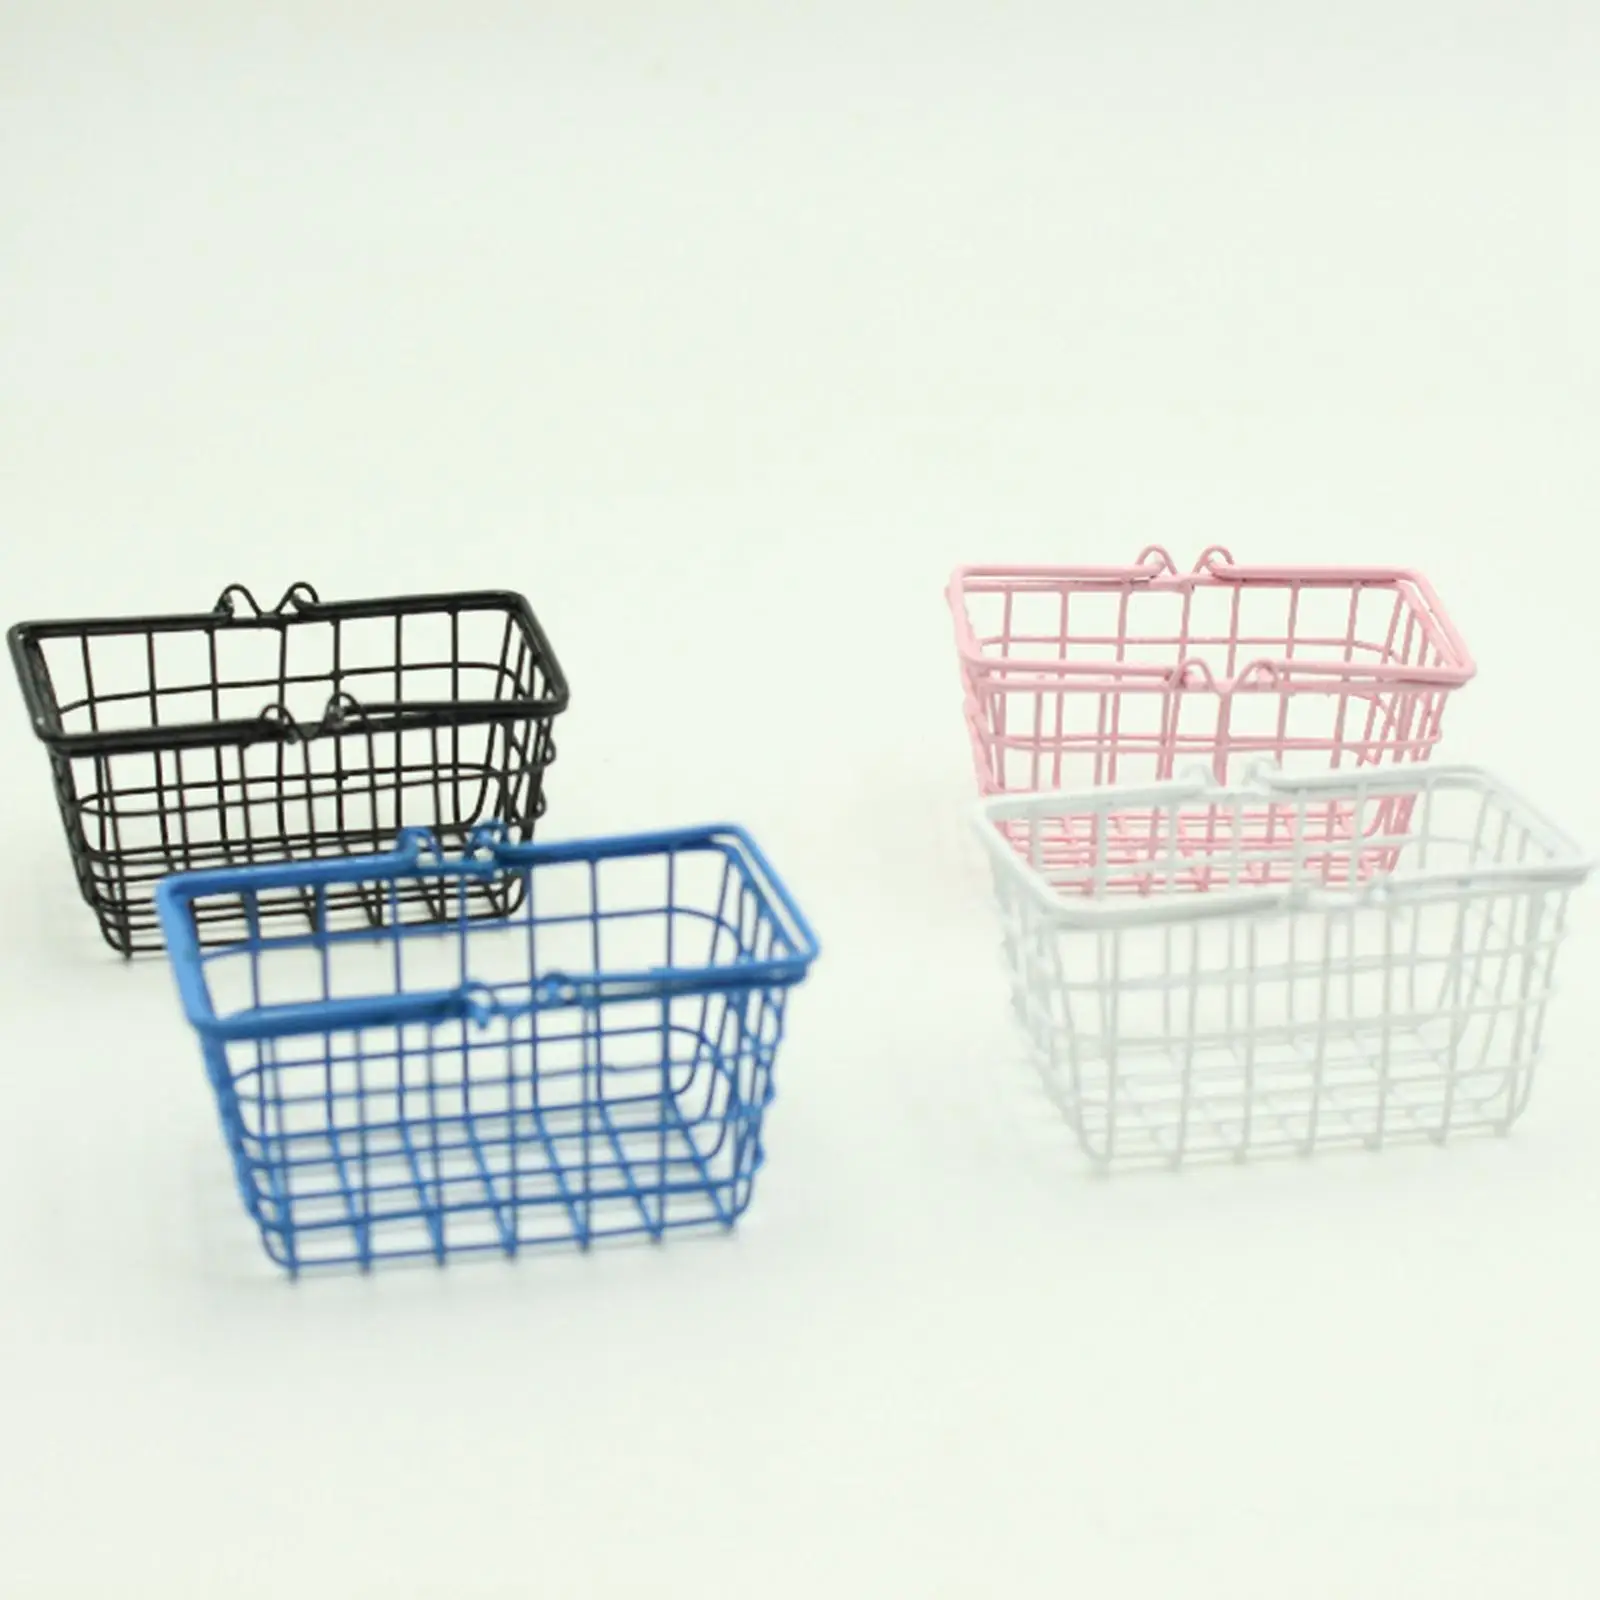 1:12 Scale Simulated Clay Basket Pretend Playing Toy Simulation Miniature Shopping Basket for DIY Model Doll House Accessories